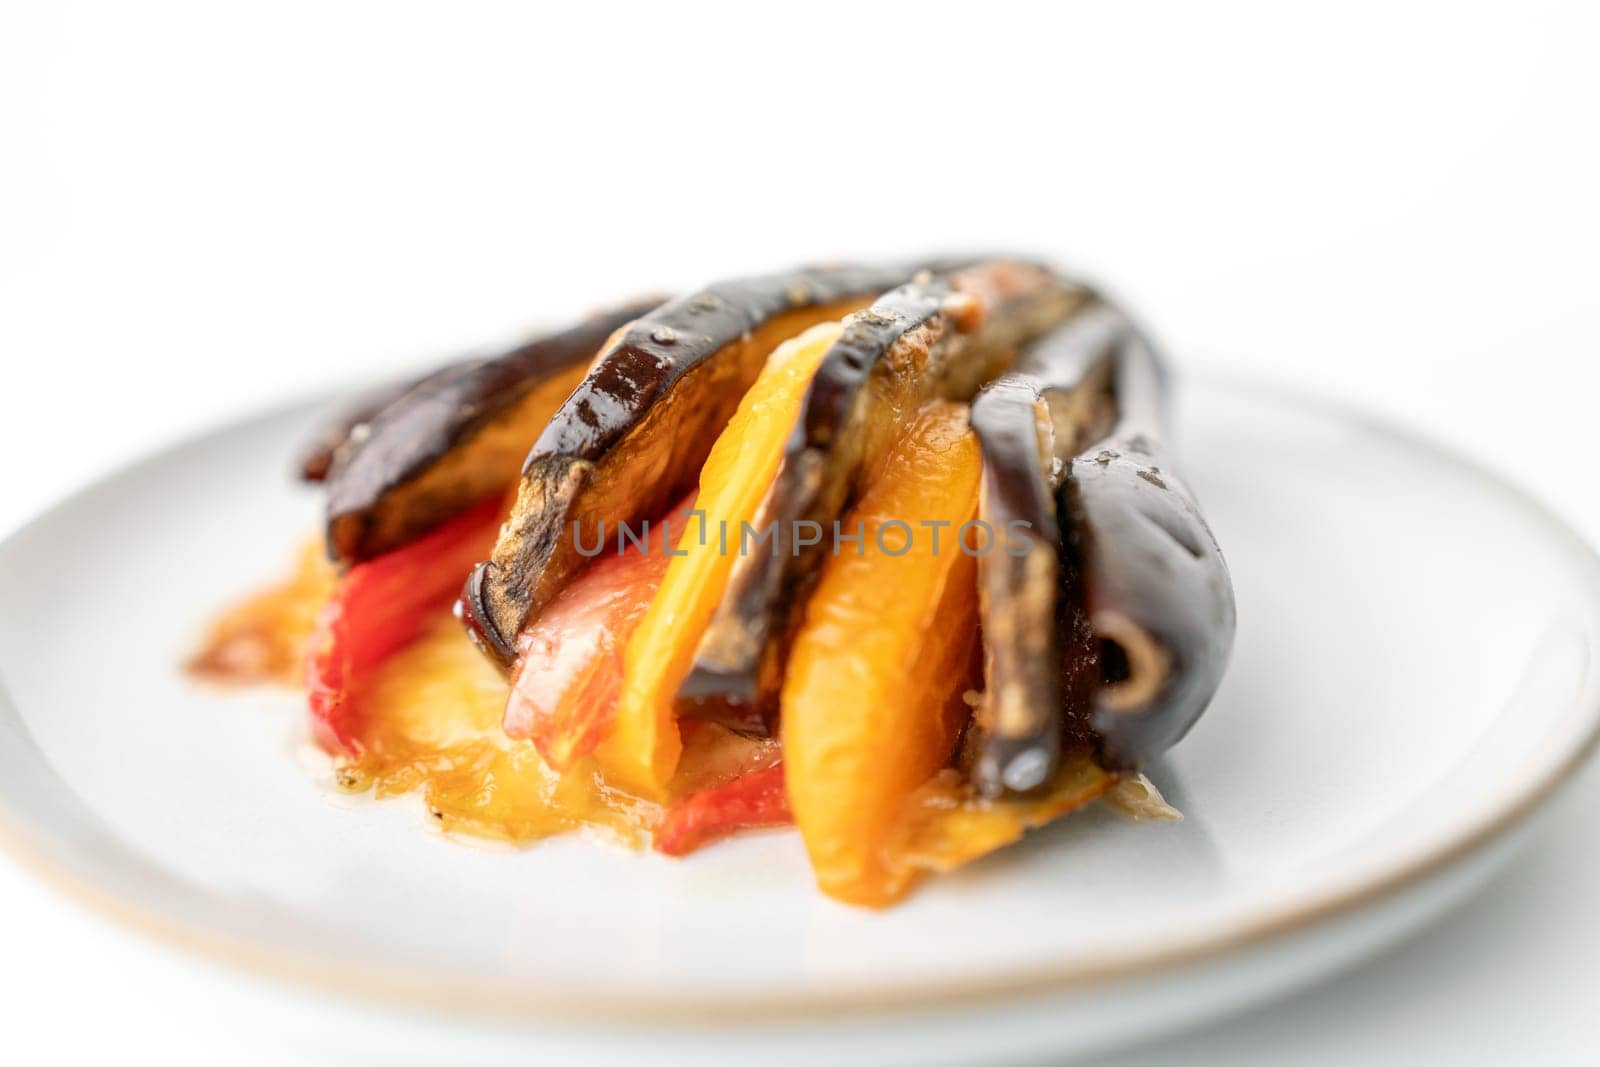 A plate of food with a variety of vegetables, including peppers and eggplant. The dish is served on a white plate and he is a healthy and colorful meal. by Matiunina